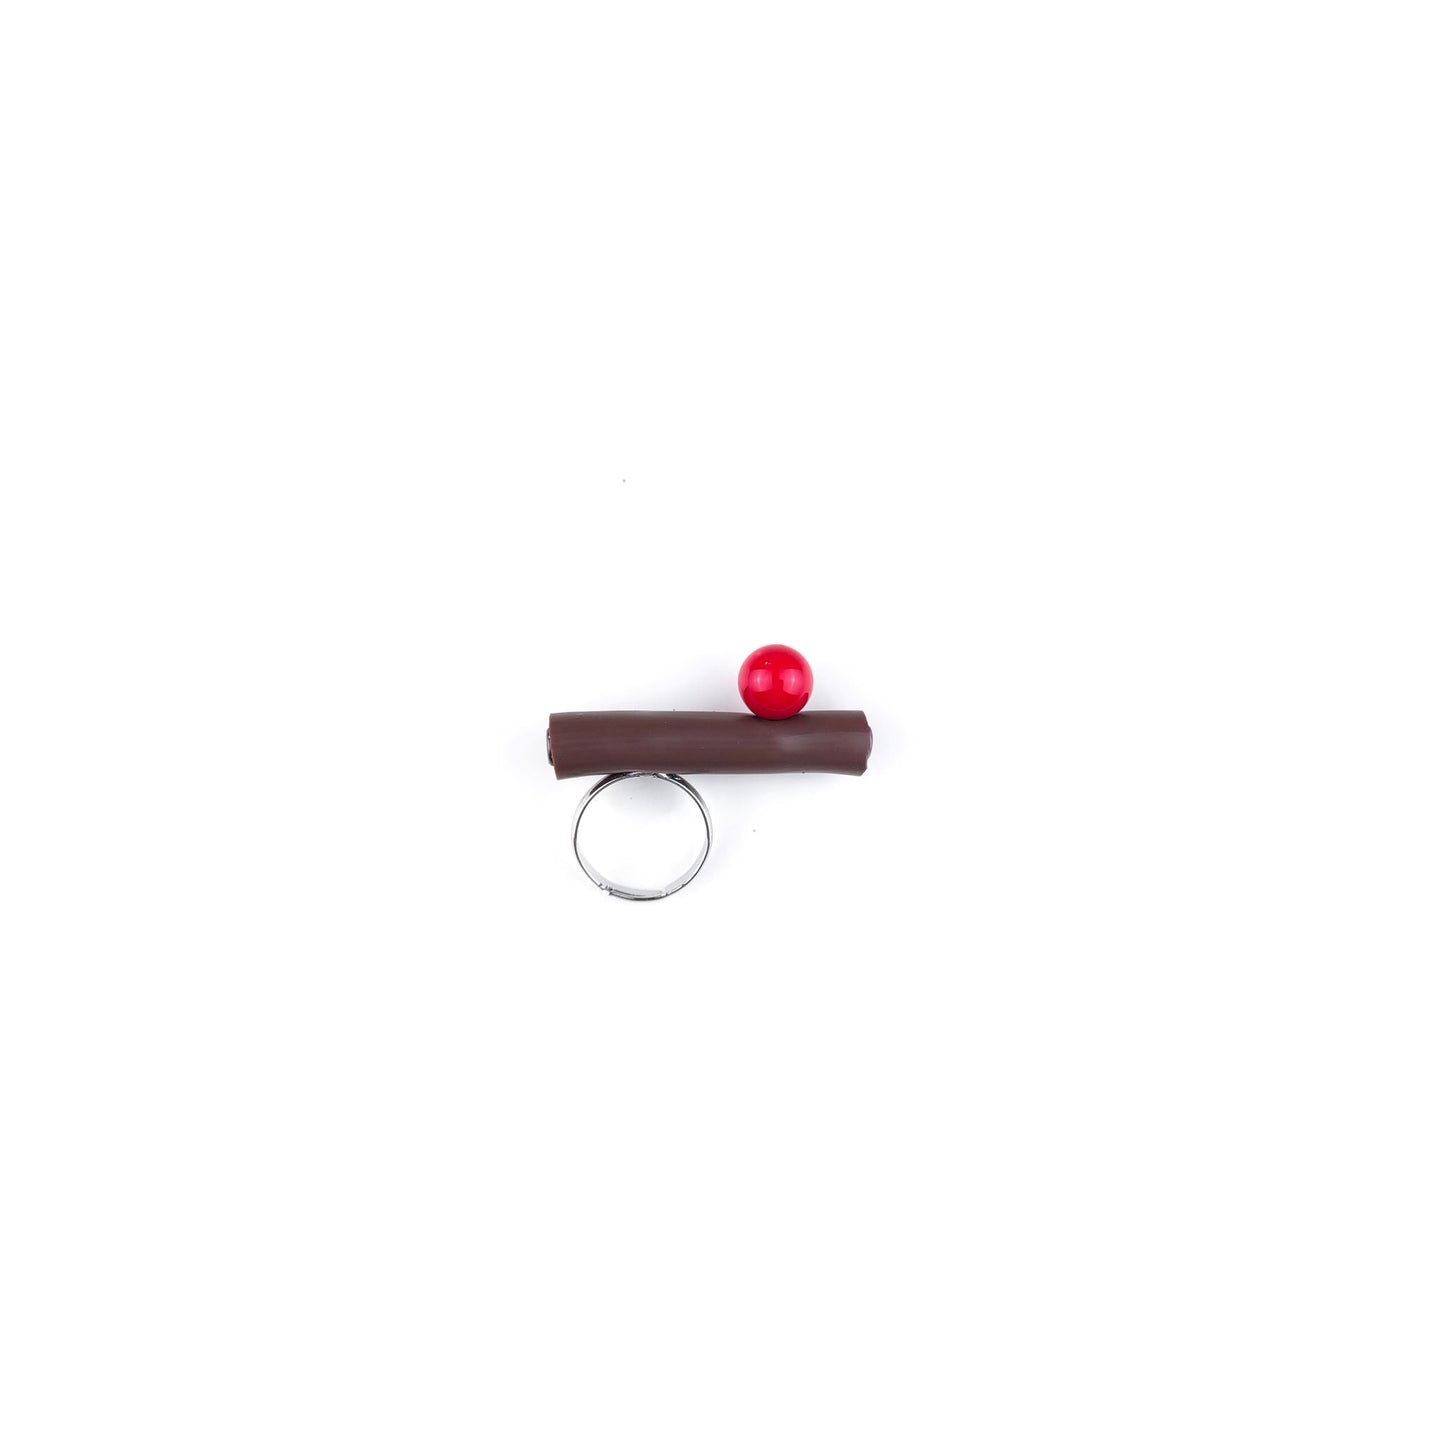 BILICO ring - brown / red pearl